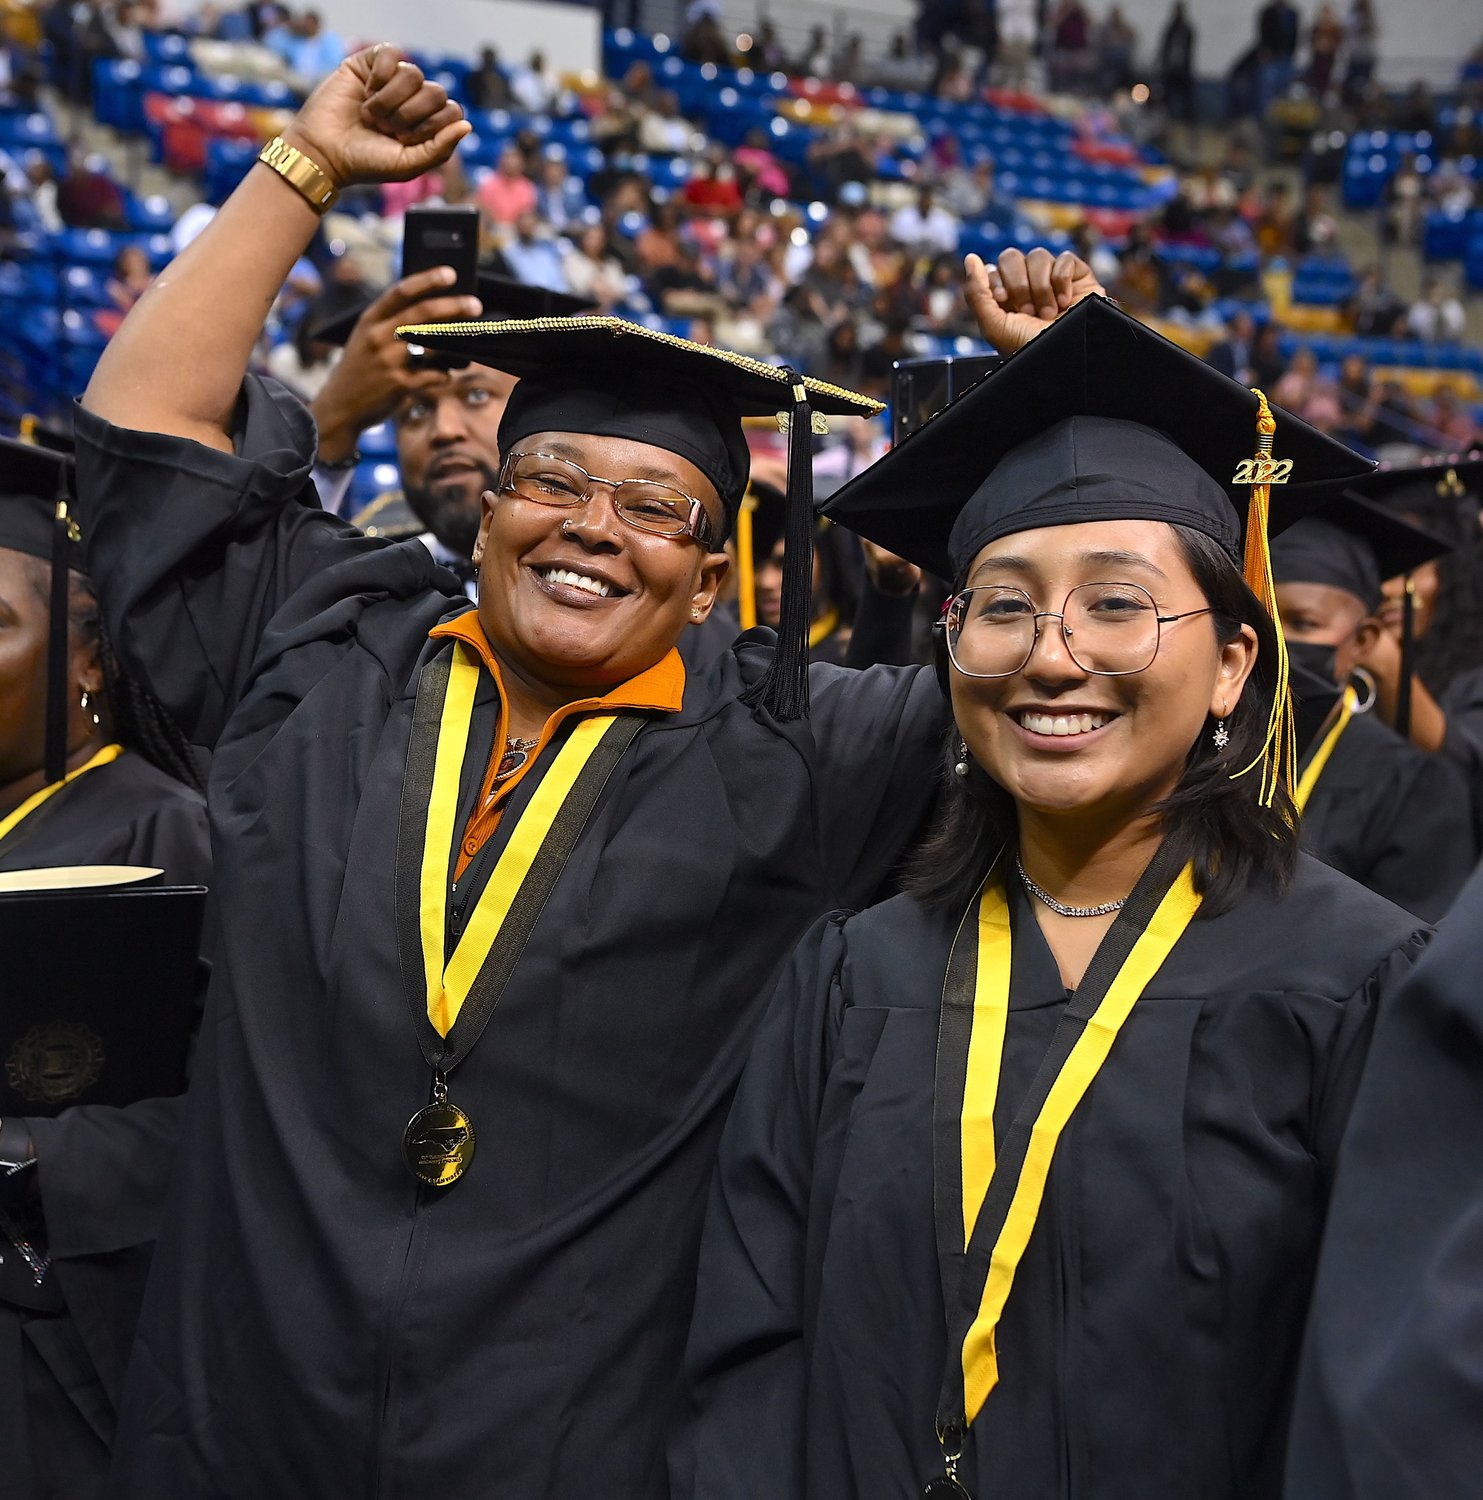 Fayetteville Technical Community College celebrated its 60th annual commencement exercises May 13 at the Crown Coliseum.